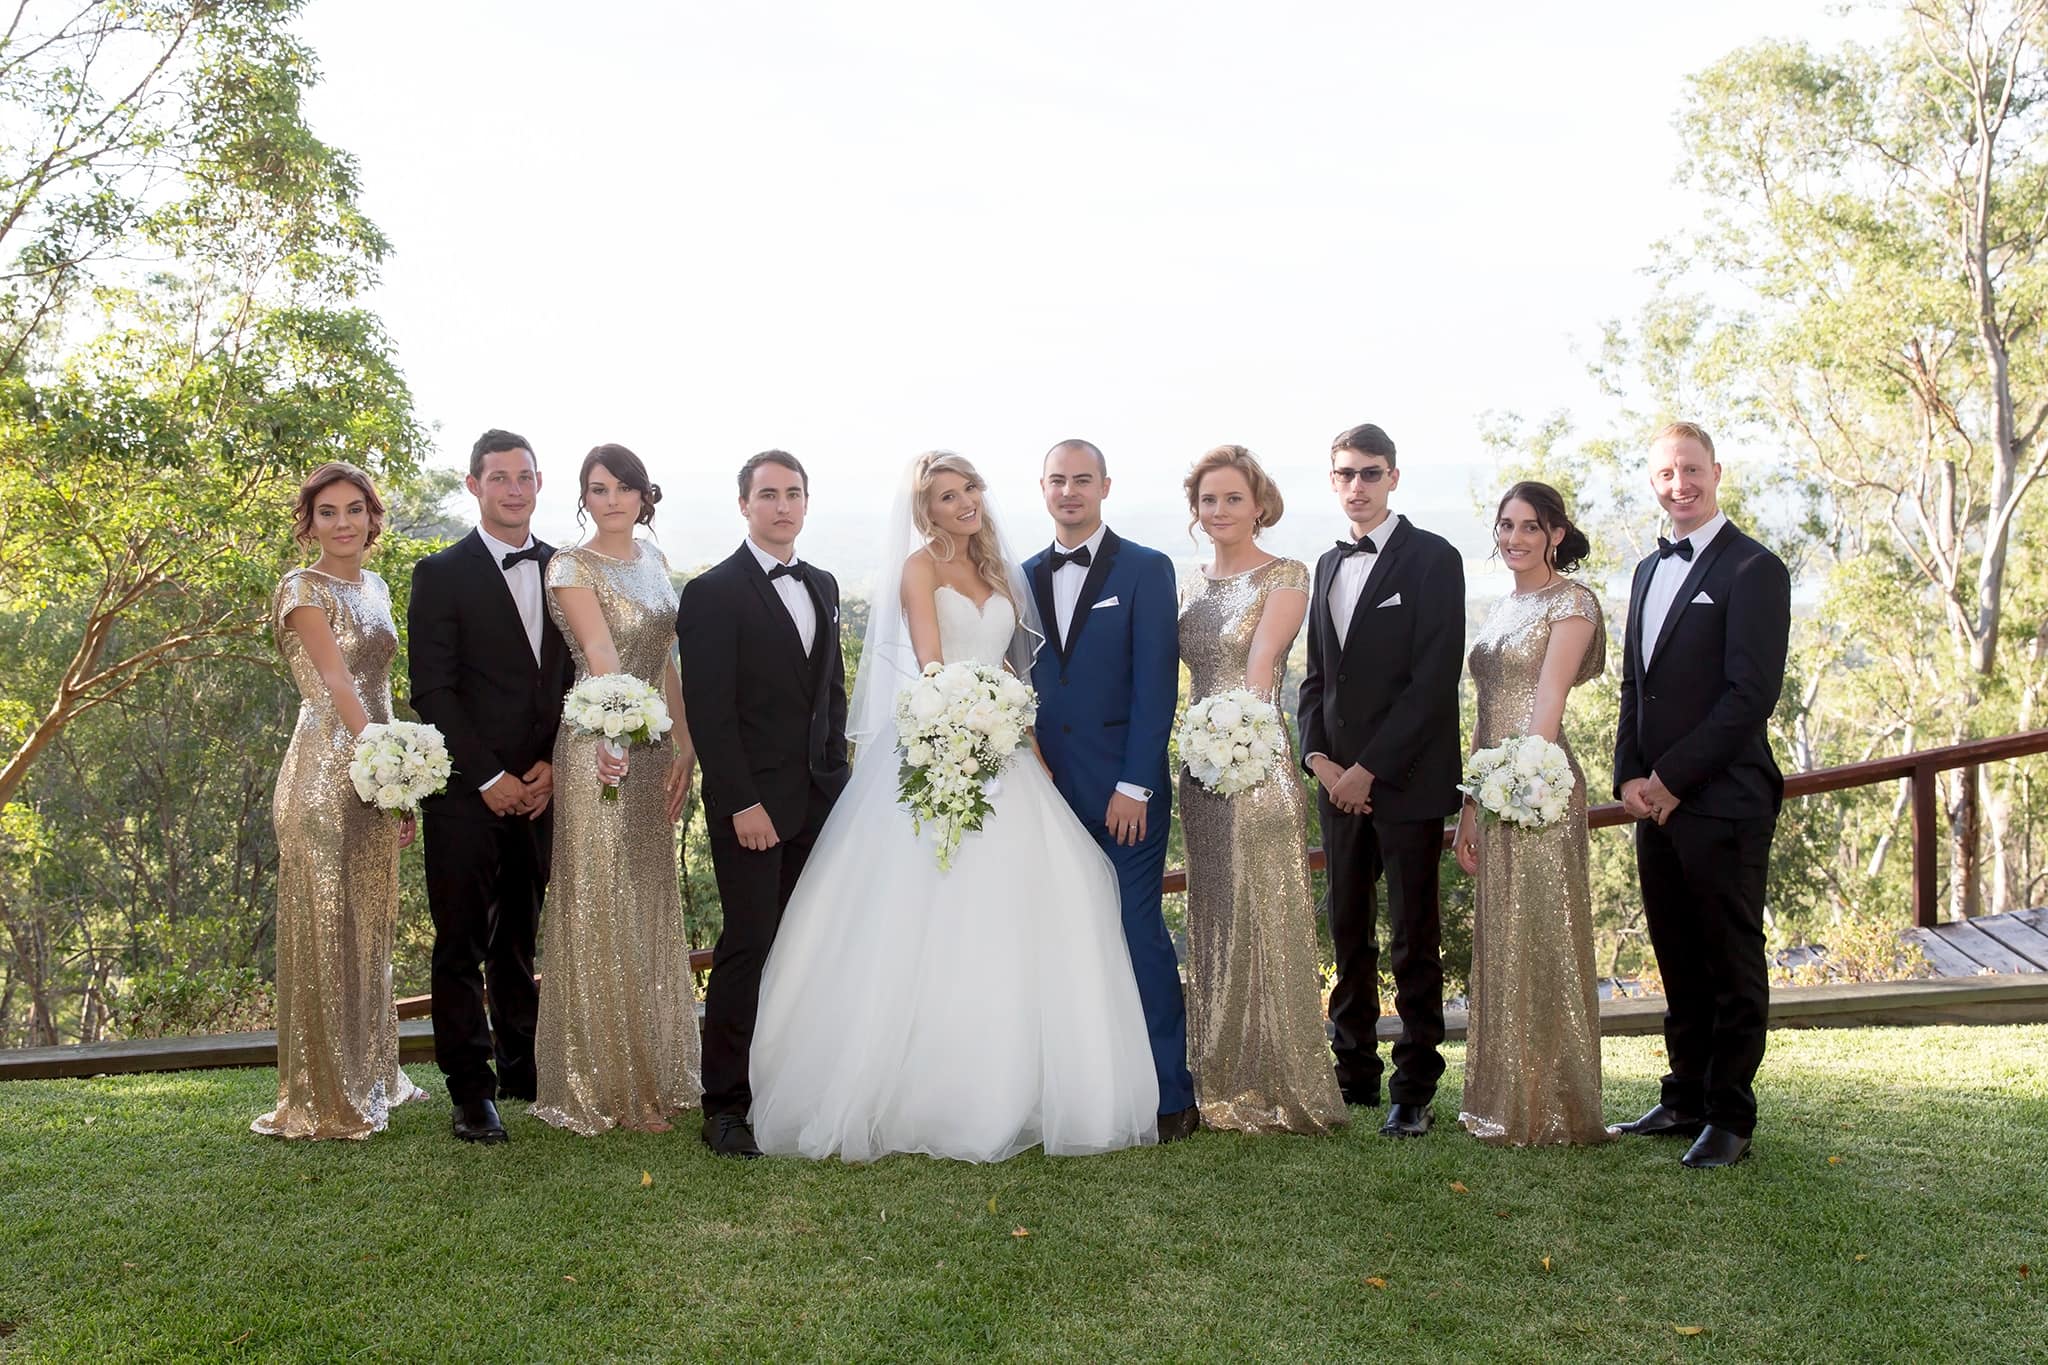 Mercure Clear Mountain Lodge wedding ceremony and bridal party.